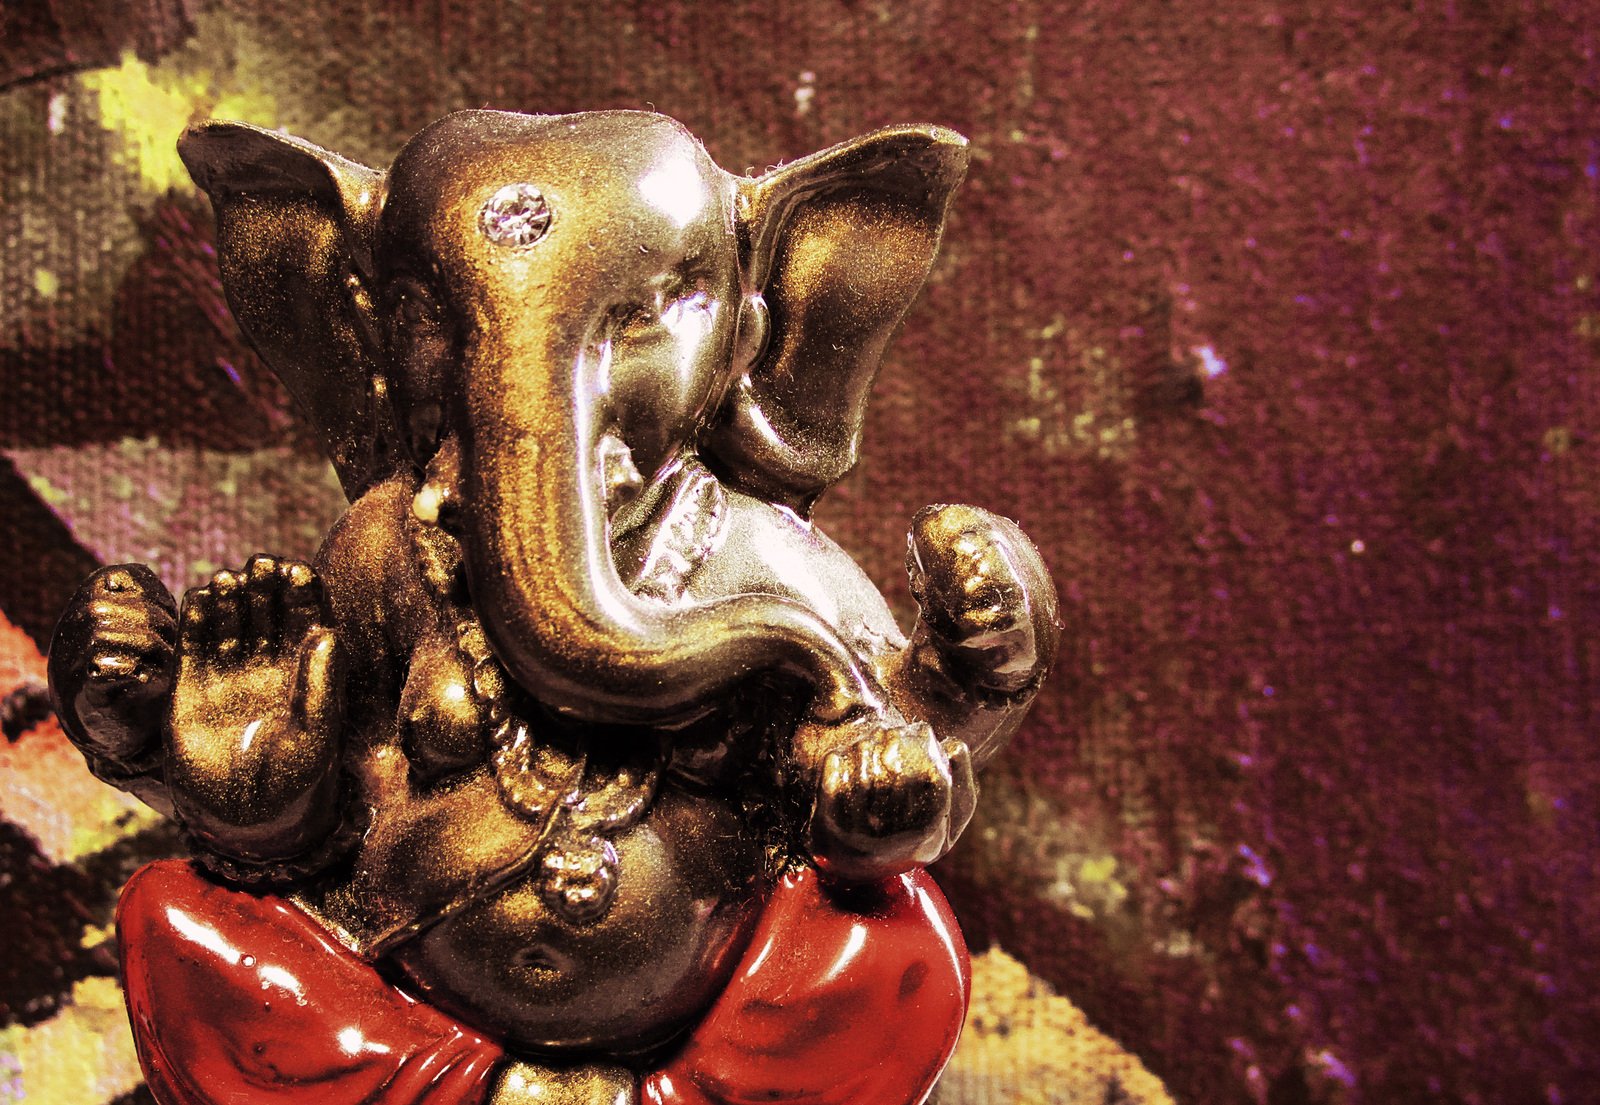 an old statue of a seated little elephant with a red bow tie